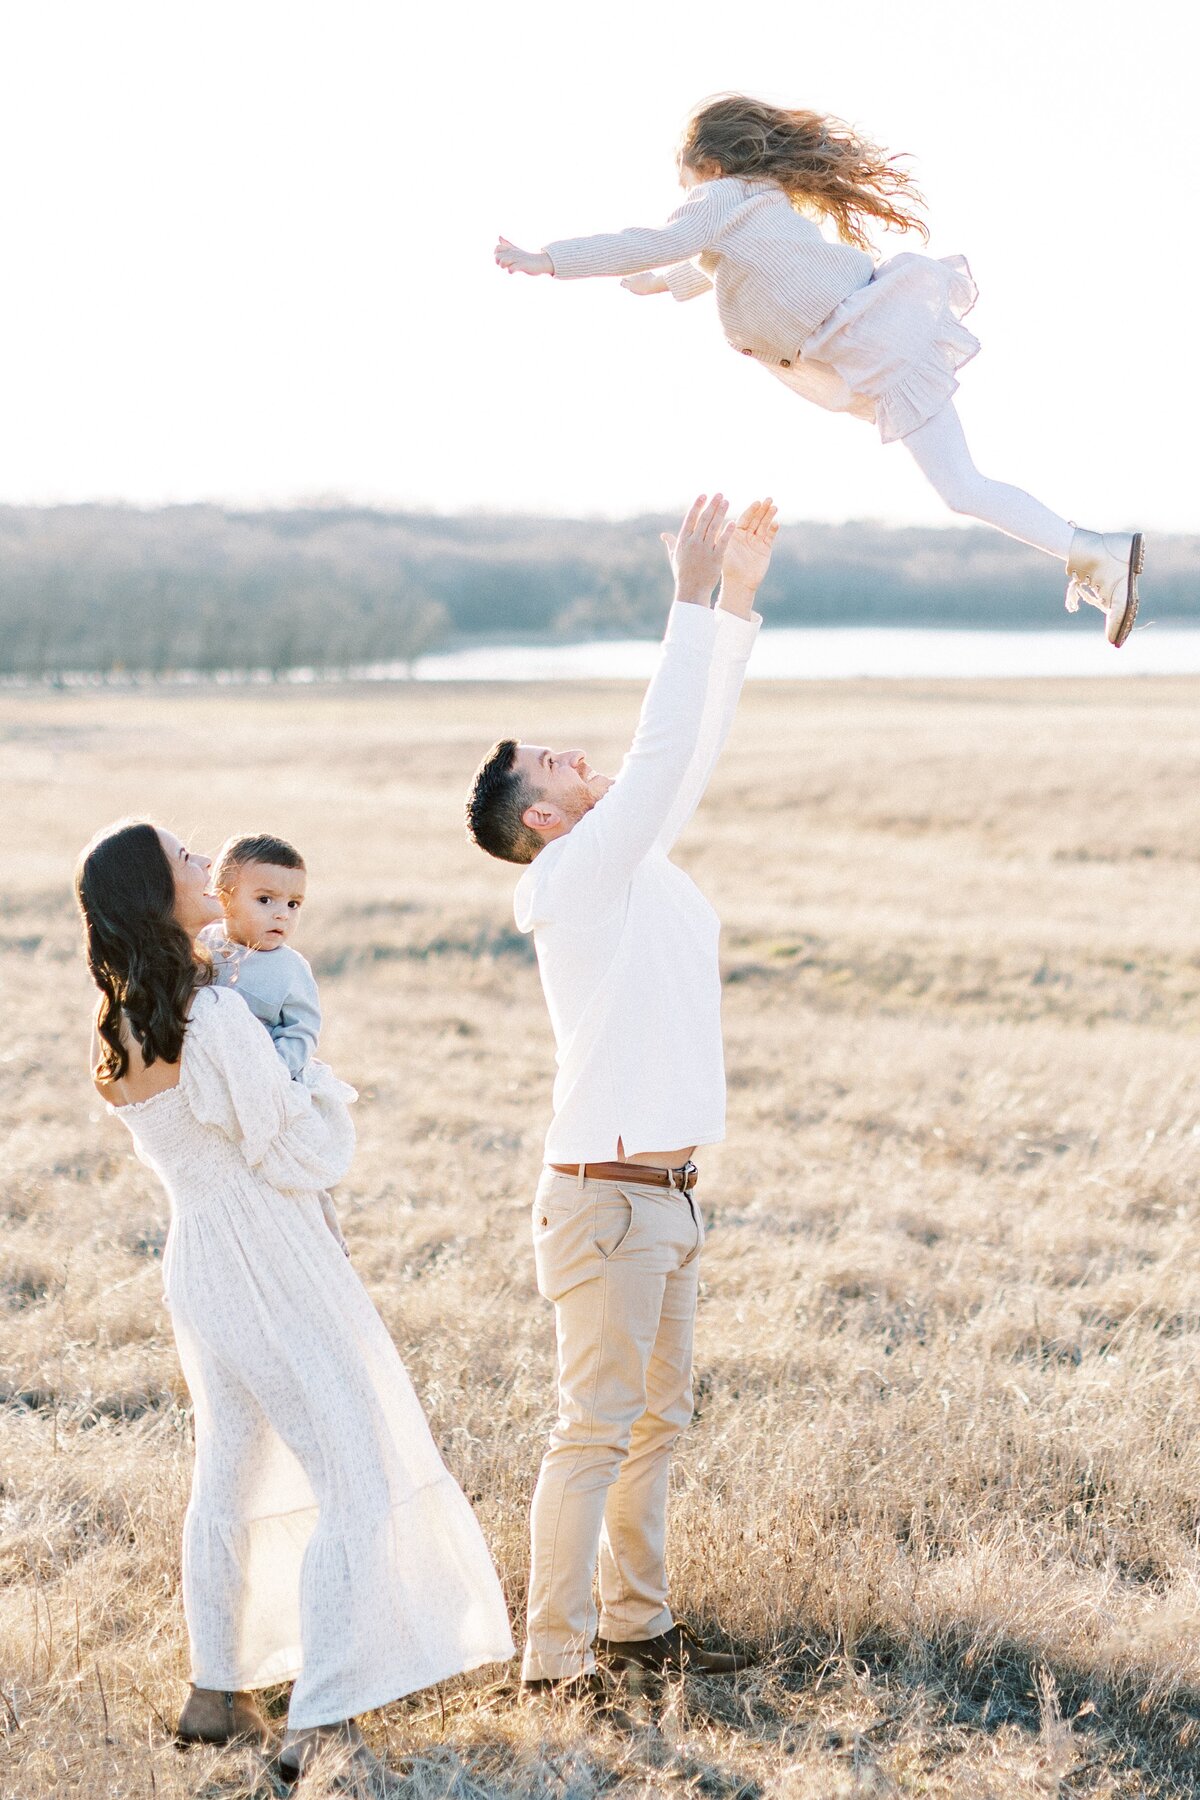 Family of 4 playing in a field at sunset for family photos tossing daughter up in the air